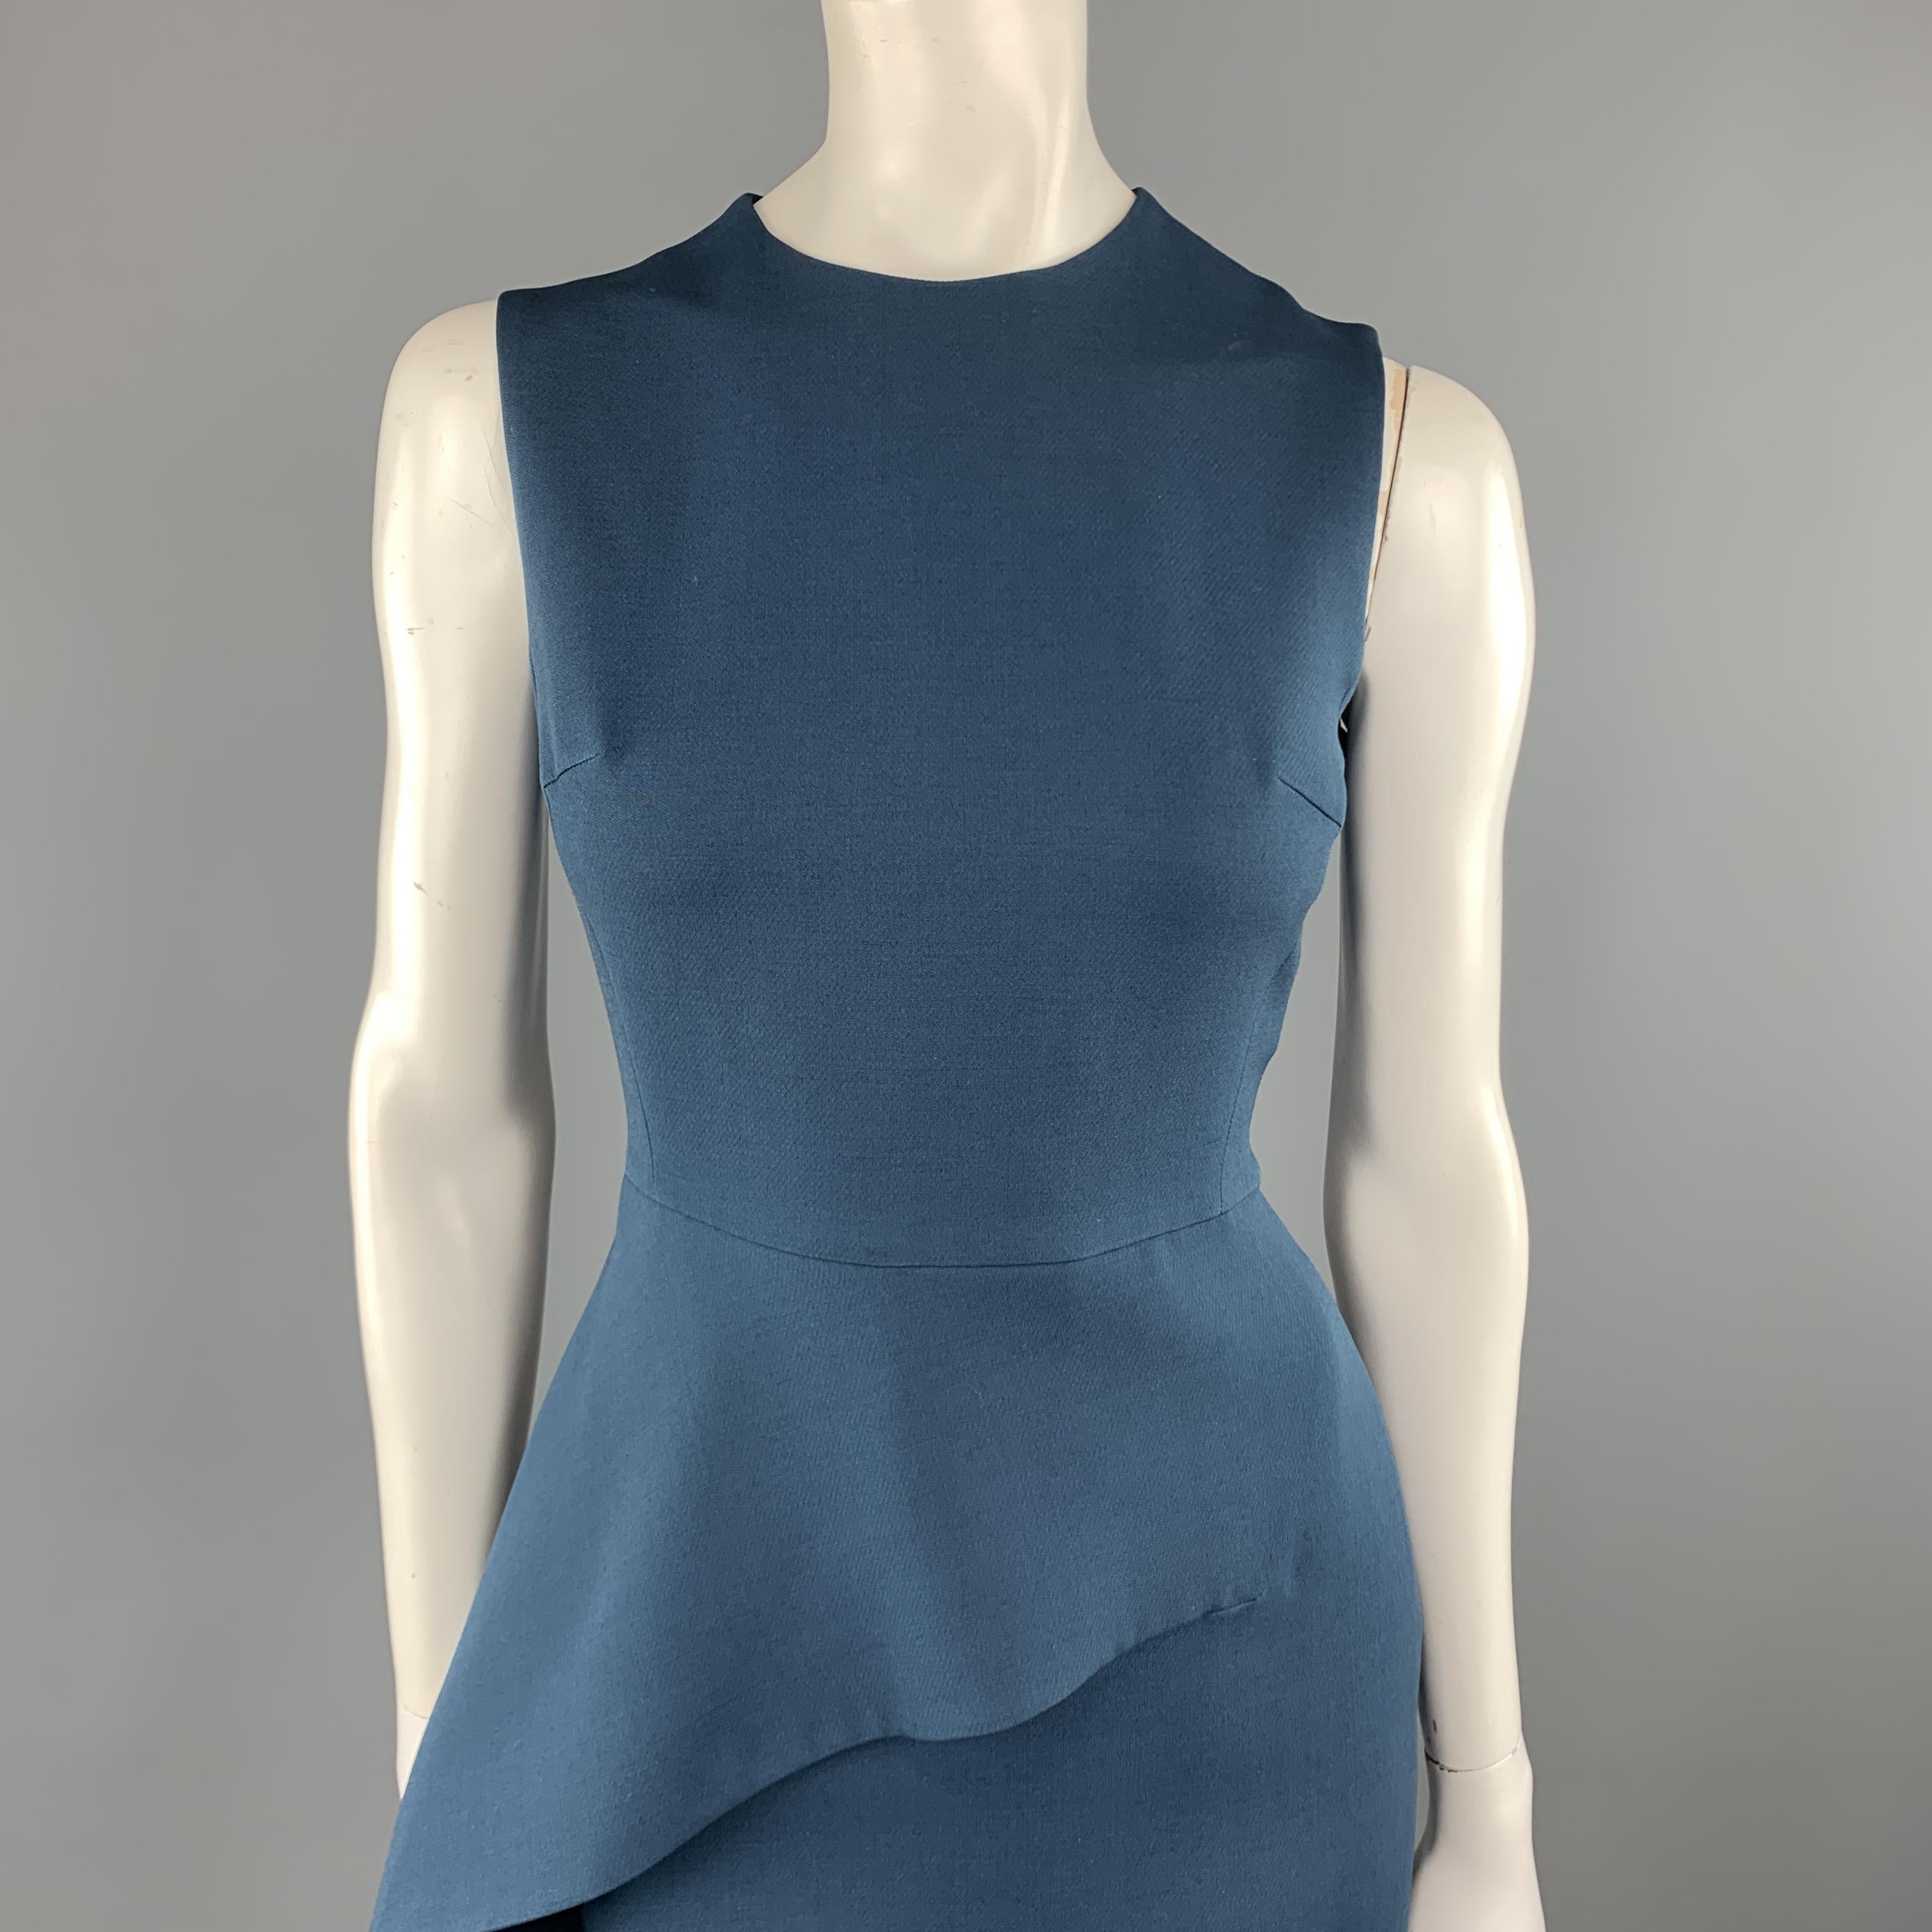 CHRISTIAN DIOR sheath dress comes in a teal blue ool silk blend fabric with a round neckline, silk liner, and asymmetrical waist peplum. Made in Italy.

Excellent Pre-Owned Condition.
Marked: 4

Measurements:

Shoulder: 13.5 in.
Bust: 35 in.
Waist: